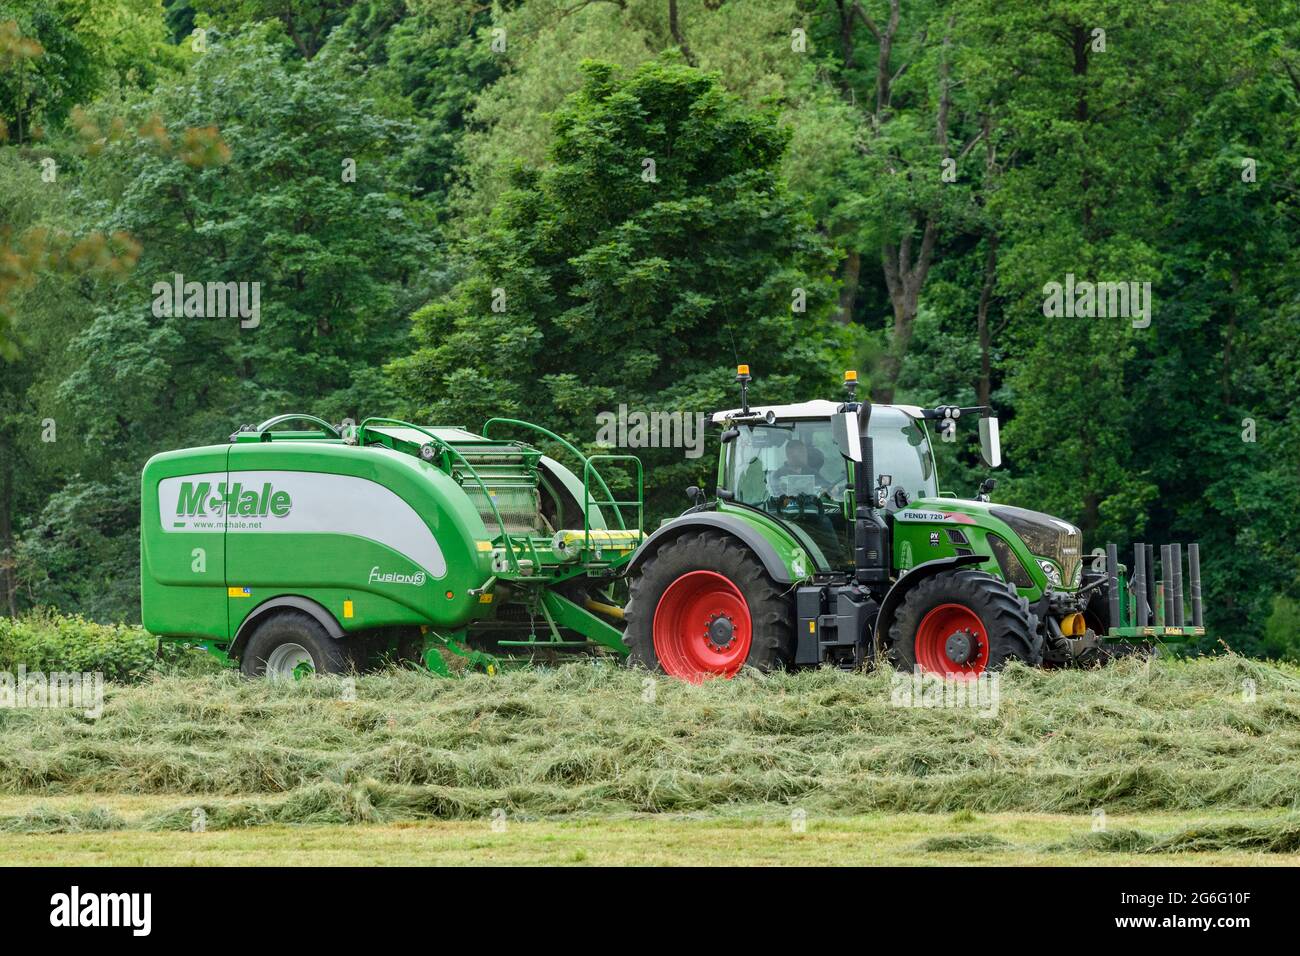 Hay or silage making (farmer driving green farm tractor at work in field, pulling McHale baler, collecting & baling dry grass) - Yorkshire England UK. Stock Photo